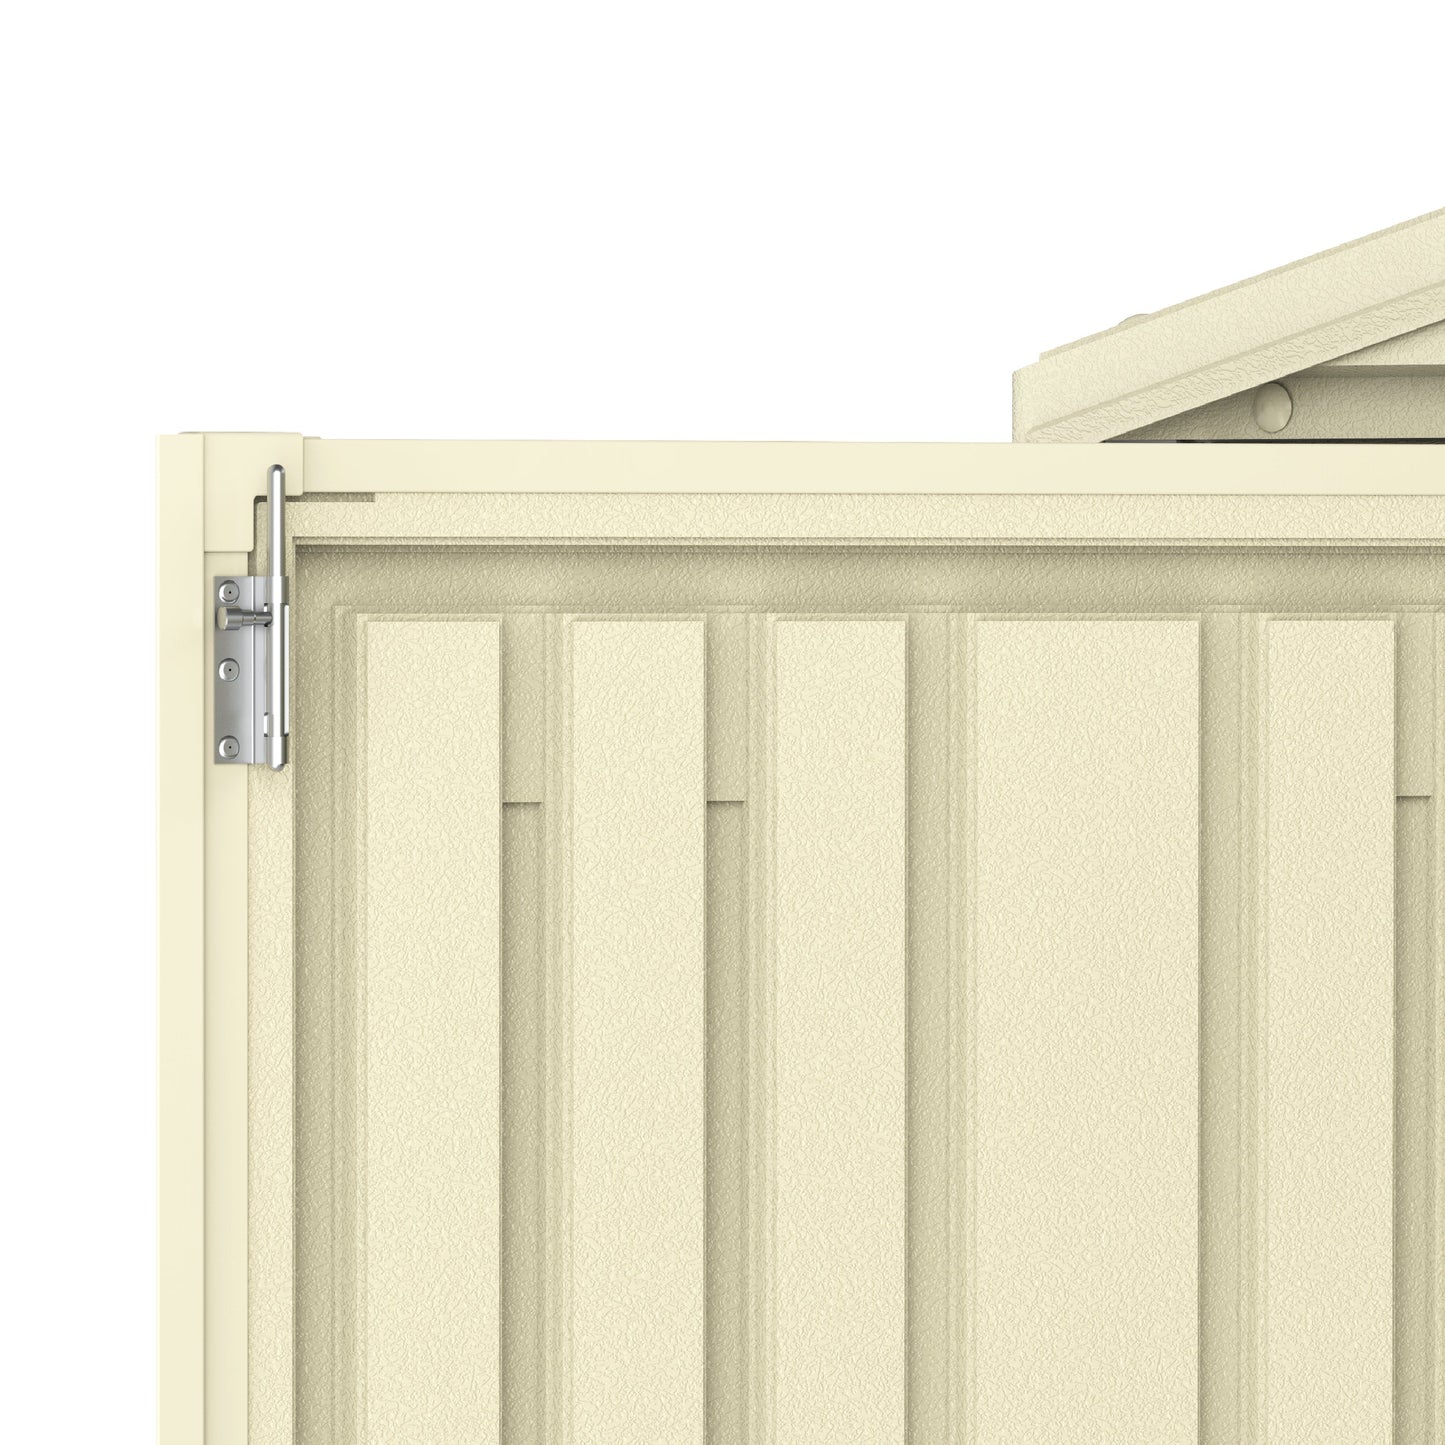 StoreAll 8x6ft (245x168x222 cm) Resin Garden Storage Shed